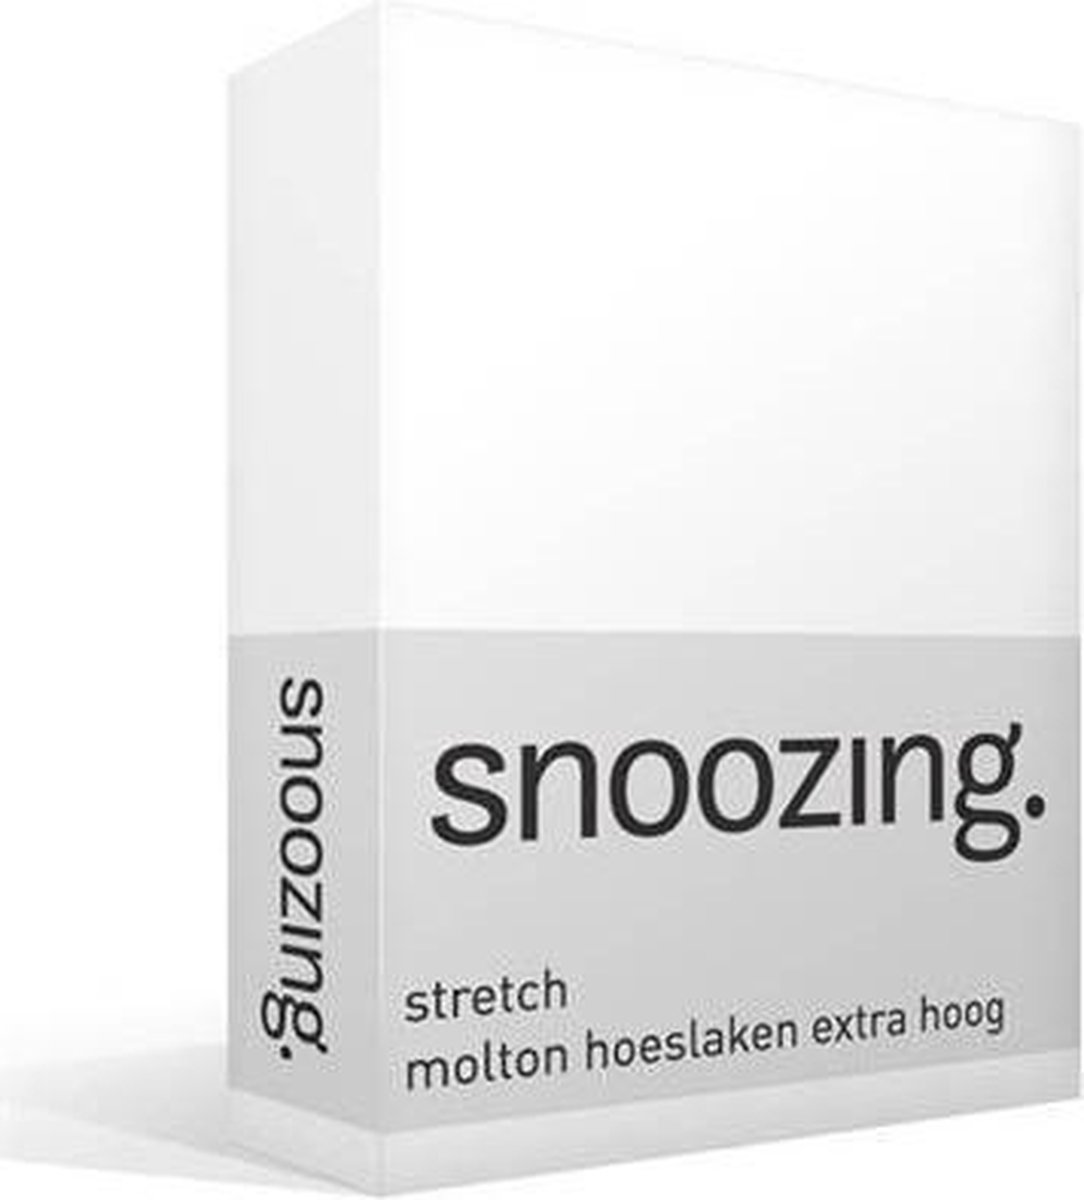 Snoozing Stretch Molton Hoeslaken Extra Hoog - 80% Katoen - 20% Polyester - 1-persoons (90x200/220 Of 100x200 Cm) - - Wit